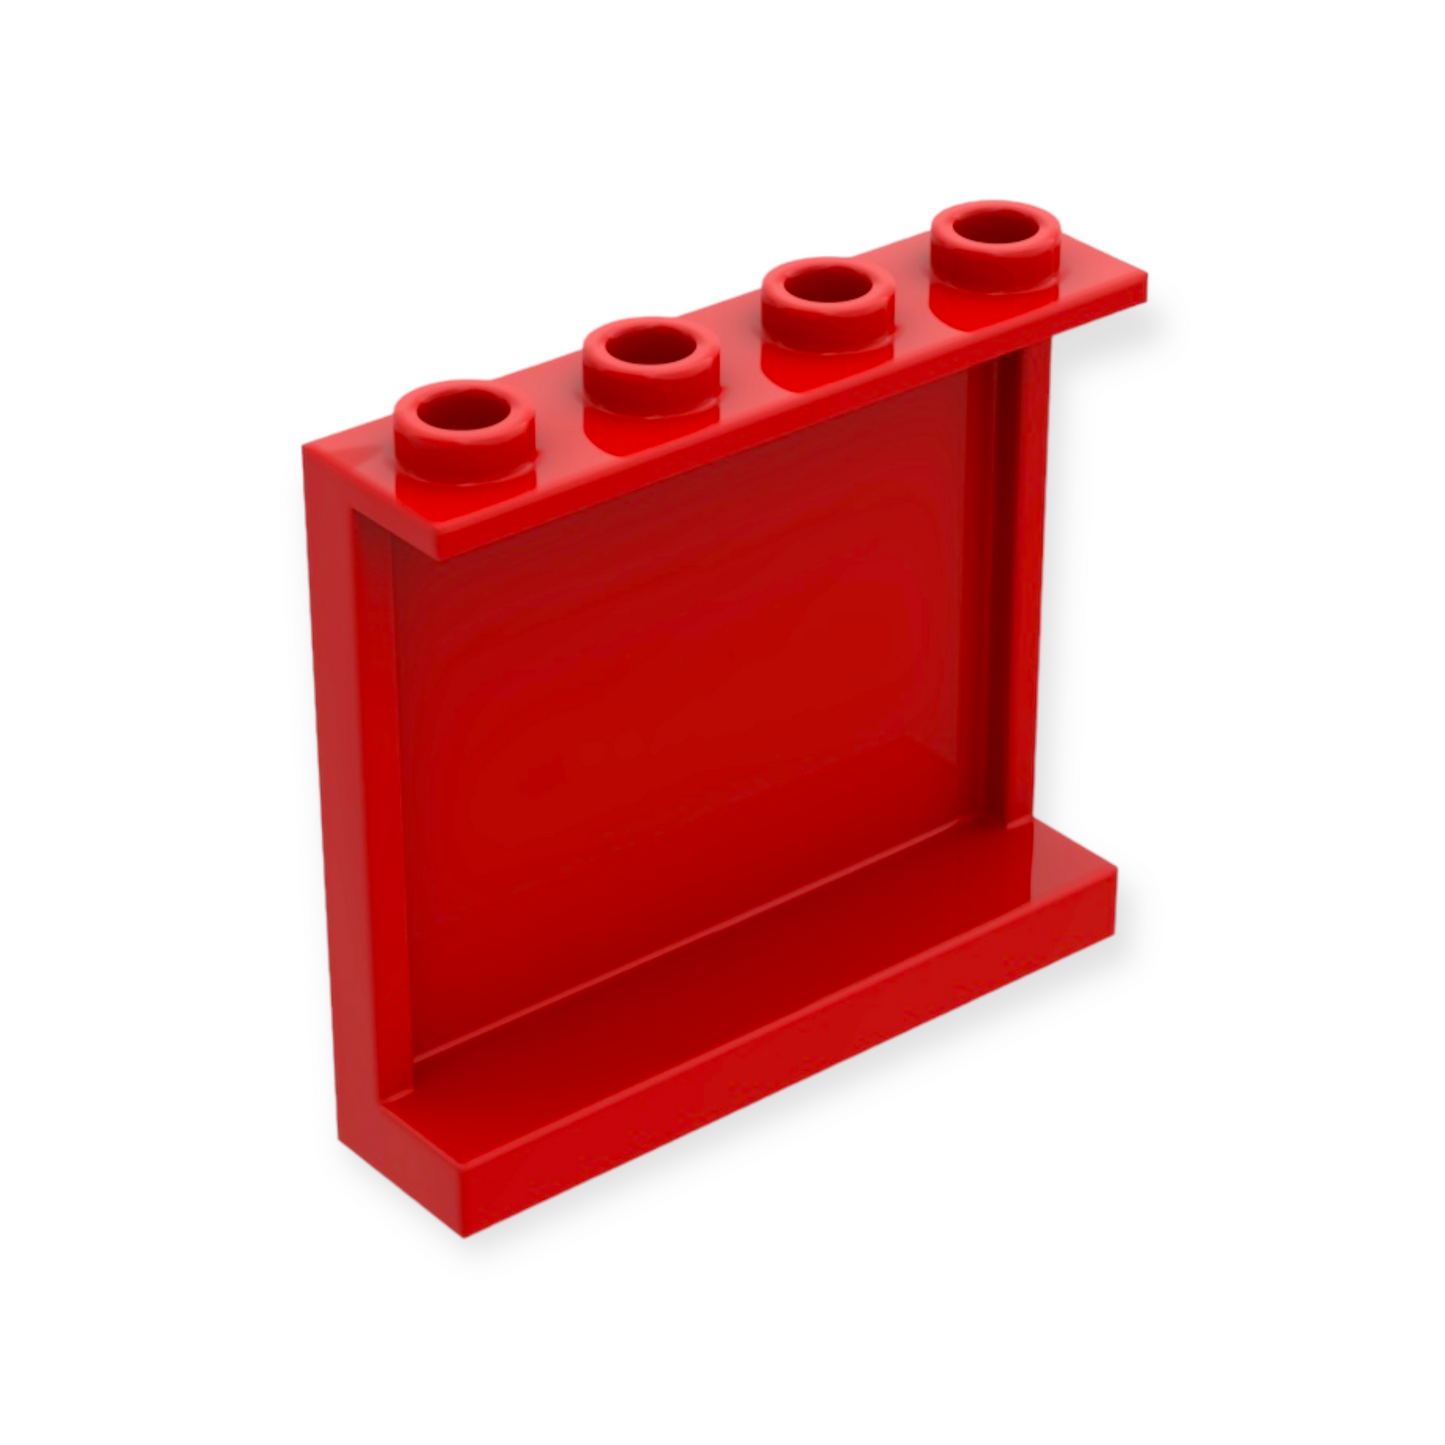 LEGO Panel 1x4x3 with Side Supports - in Red